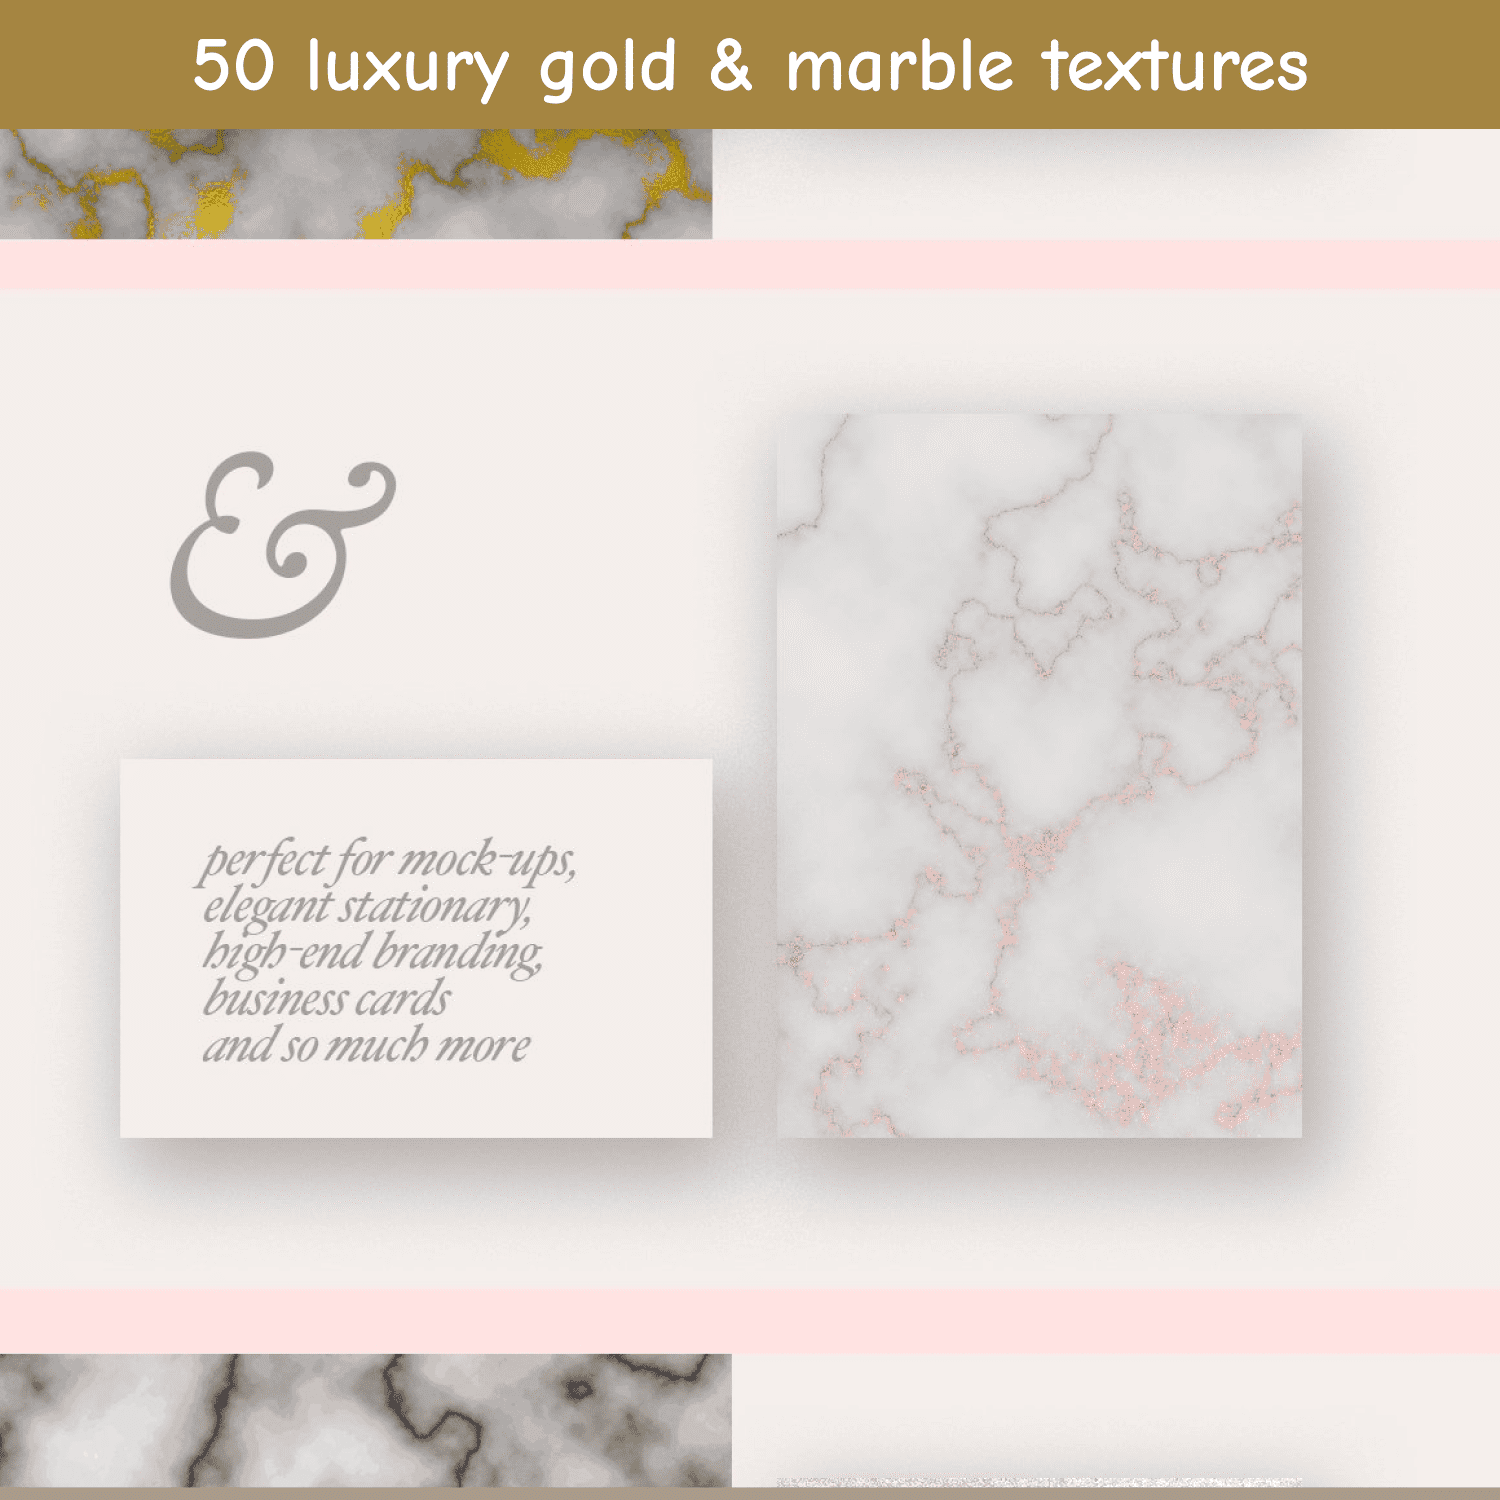 50 luxury gold & marble textures.